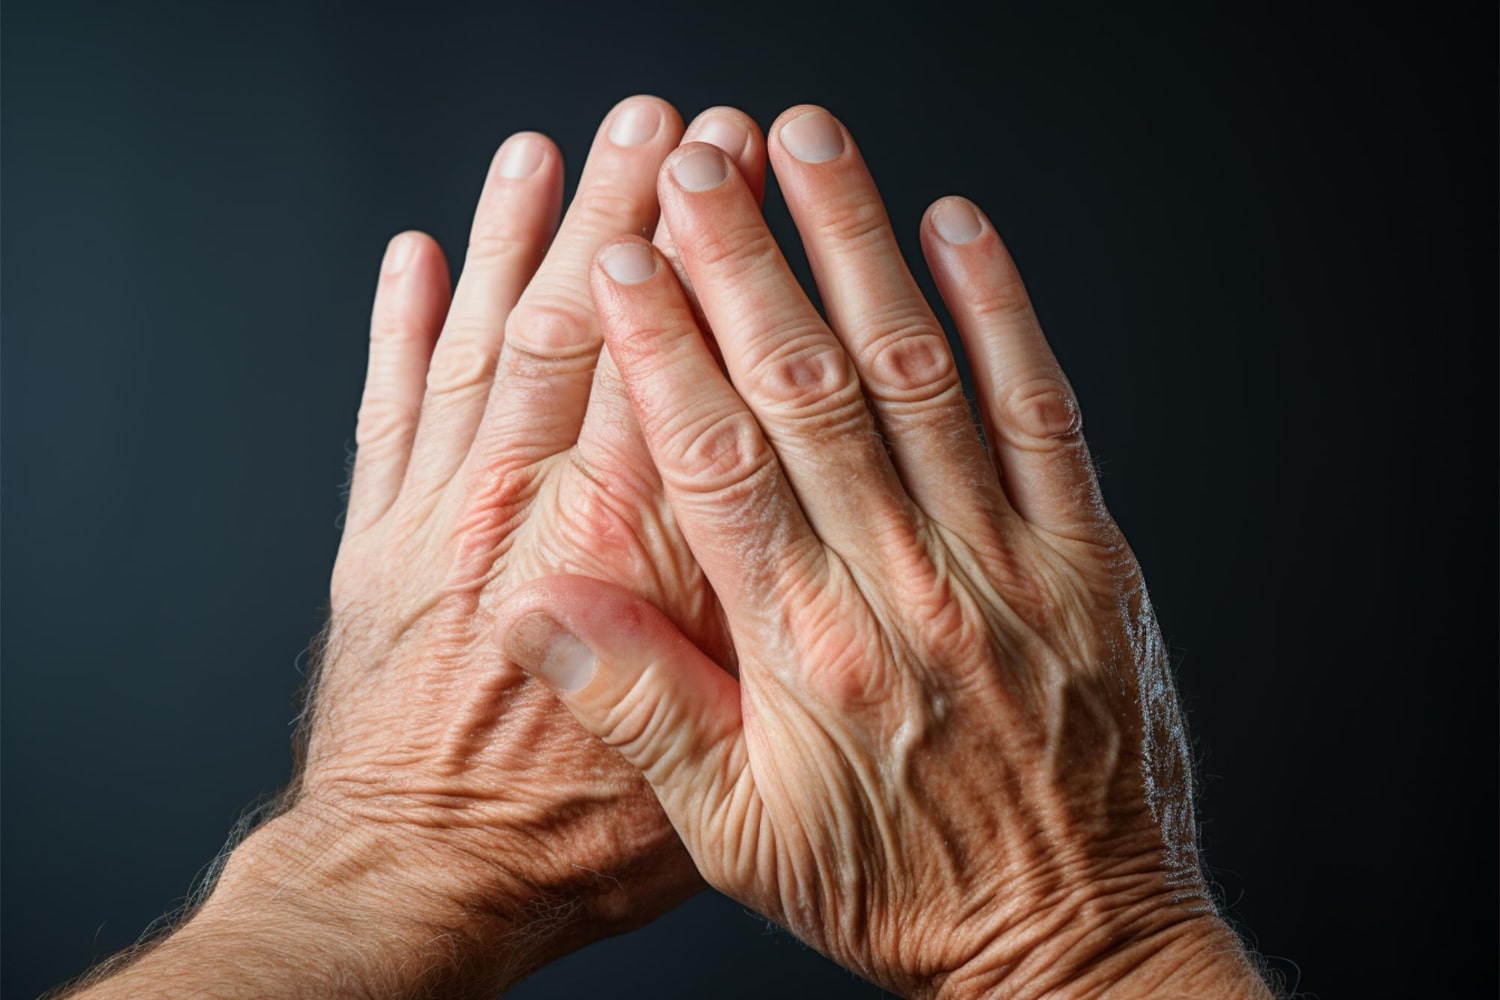 Patient experiencing relief from osteoarthritis pain after the treatment.